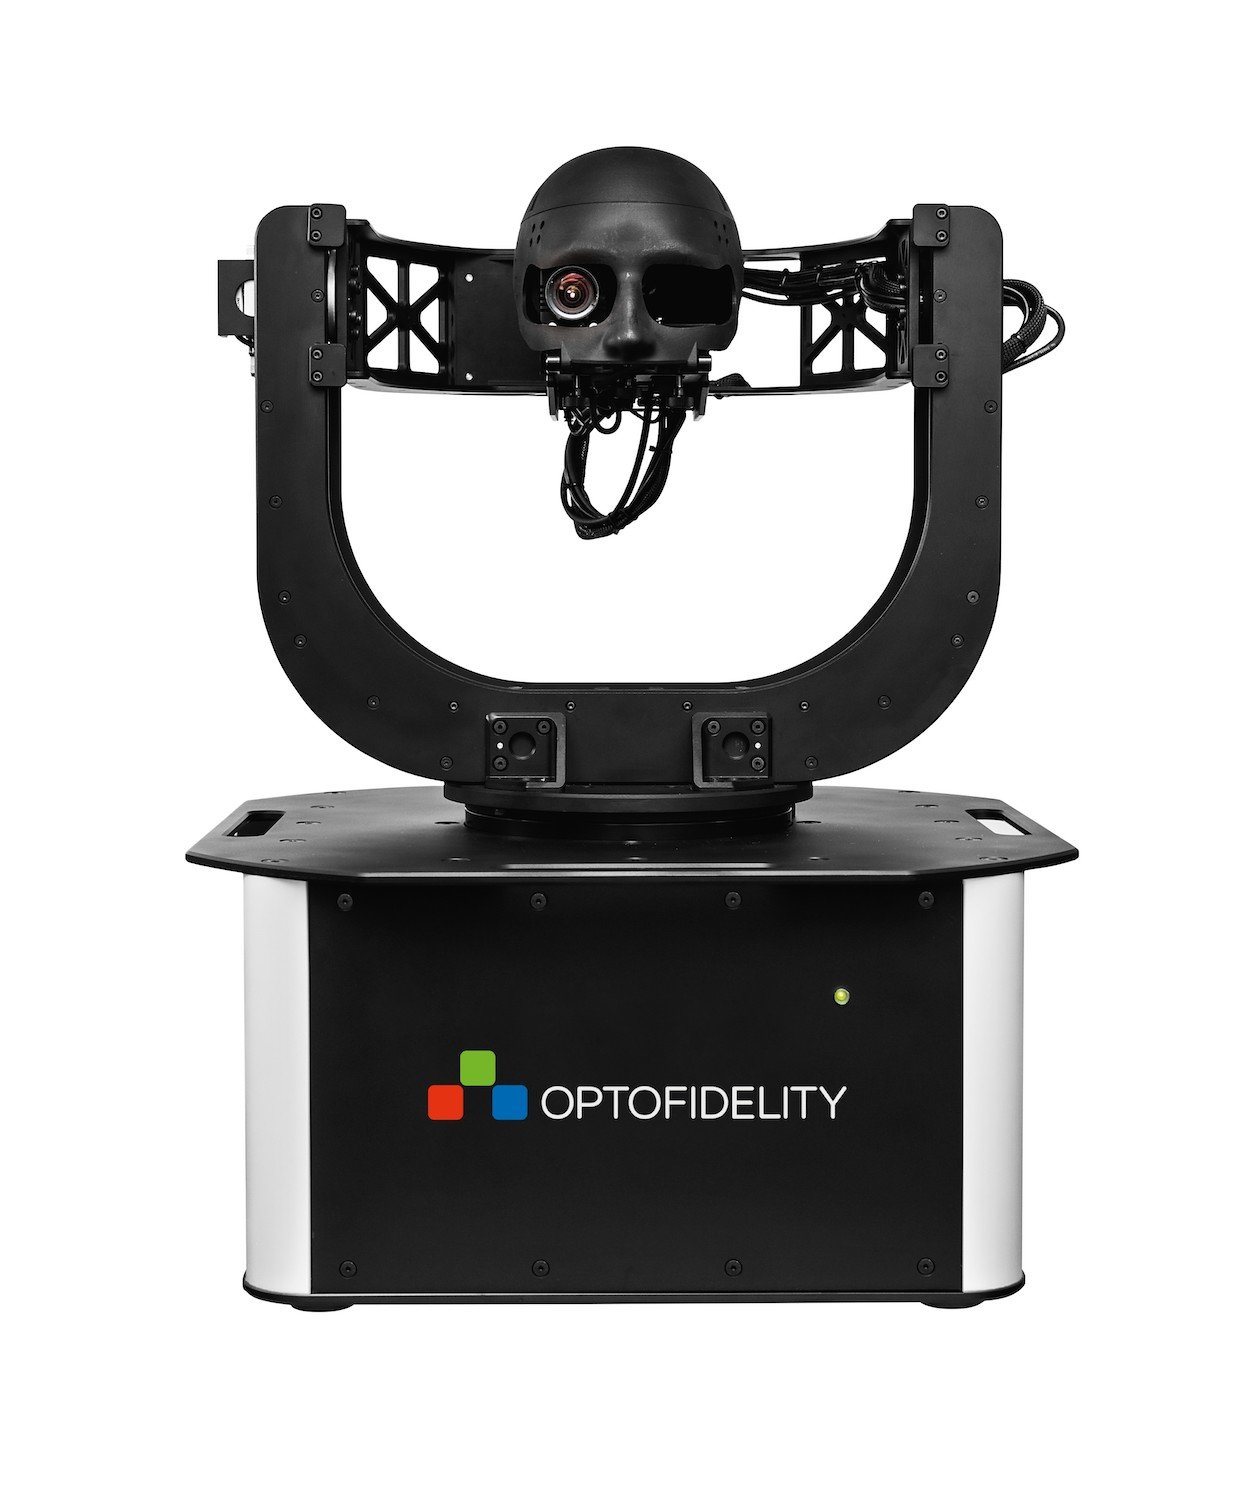 OptoFidelity_HMD_IQ_image_quality_tester_for_AR_VR_MR_Head_Mounted_Displays_1500px_high